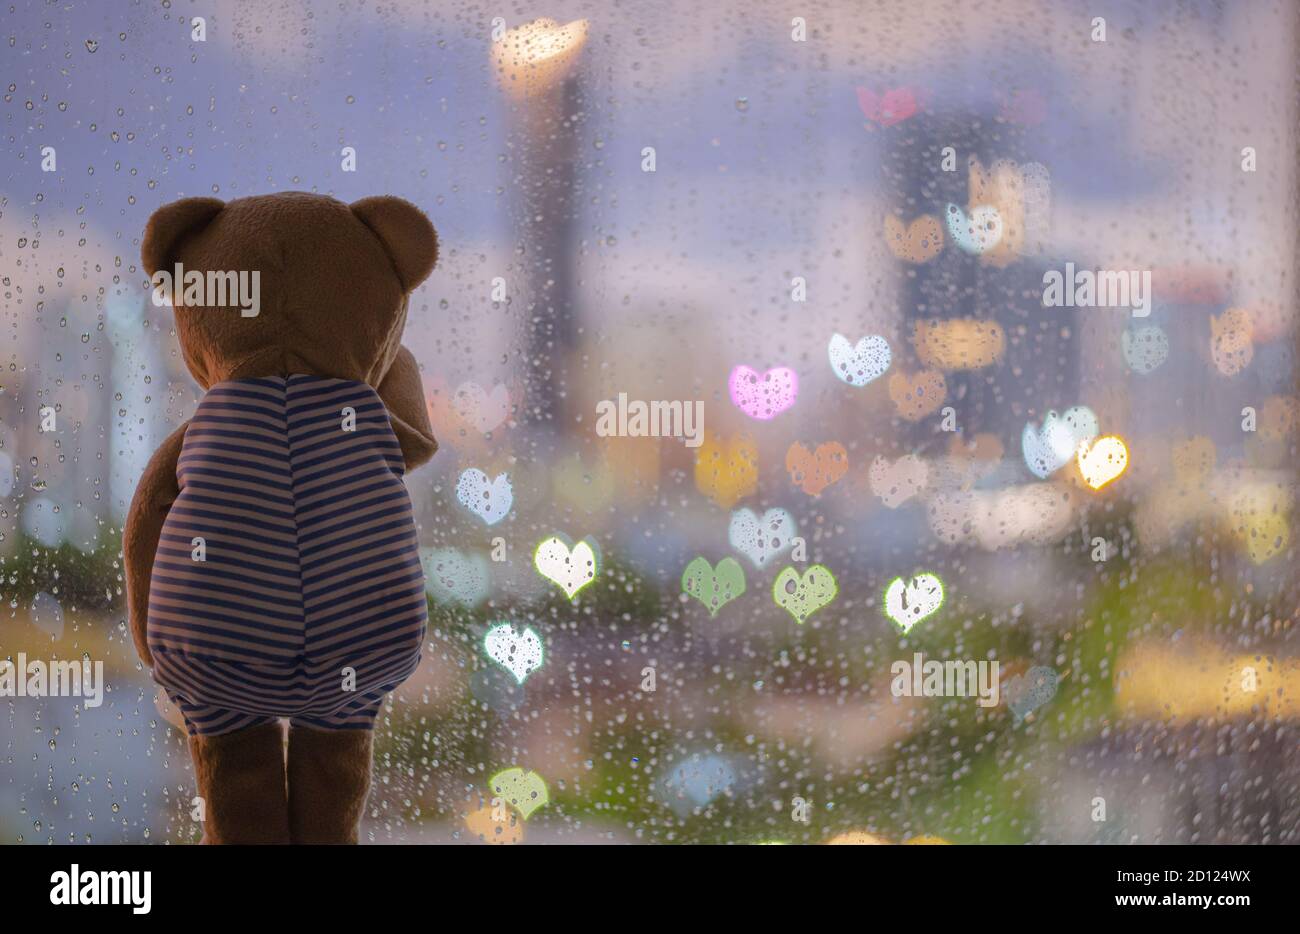 Teddy bear crying alone at window when raining with colorful love ...